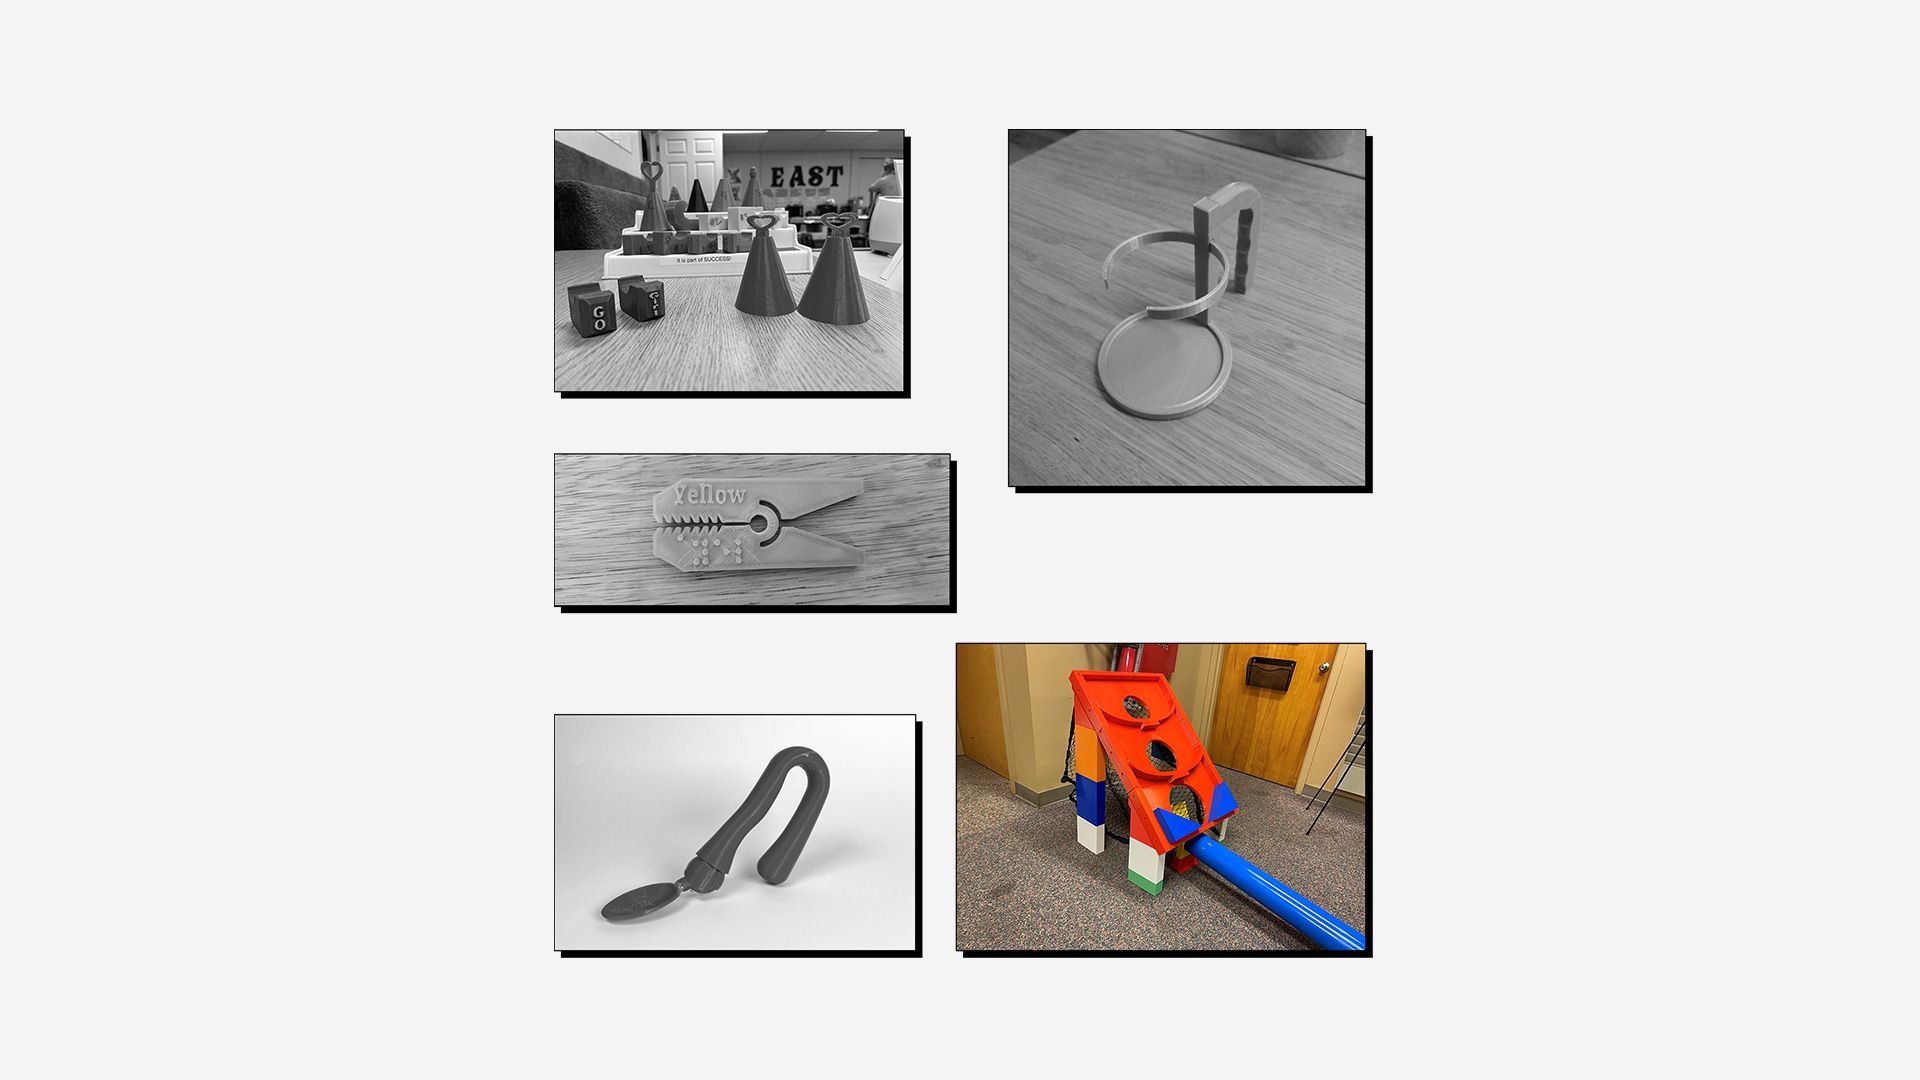 Collage of 3D printed assistive devices with winning entry (arcade ball game) highlighted.